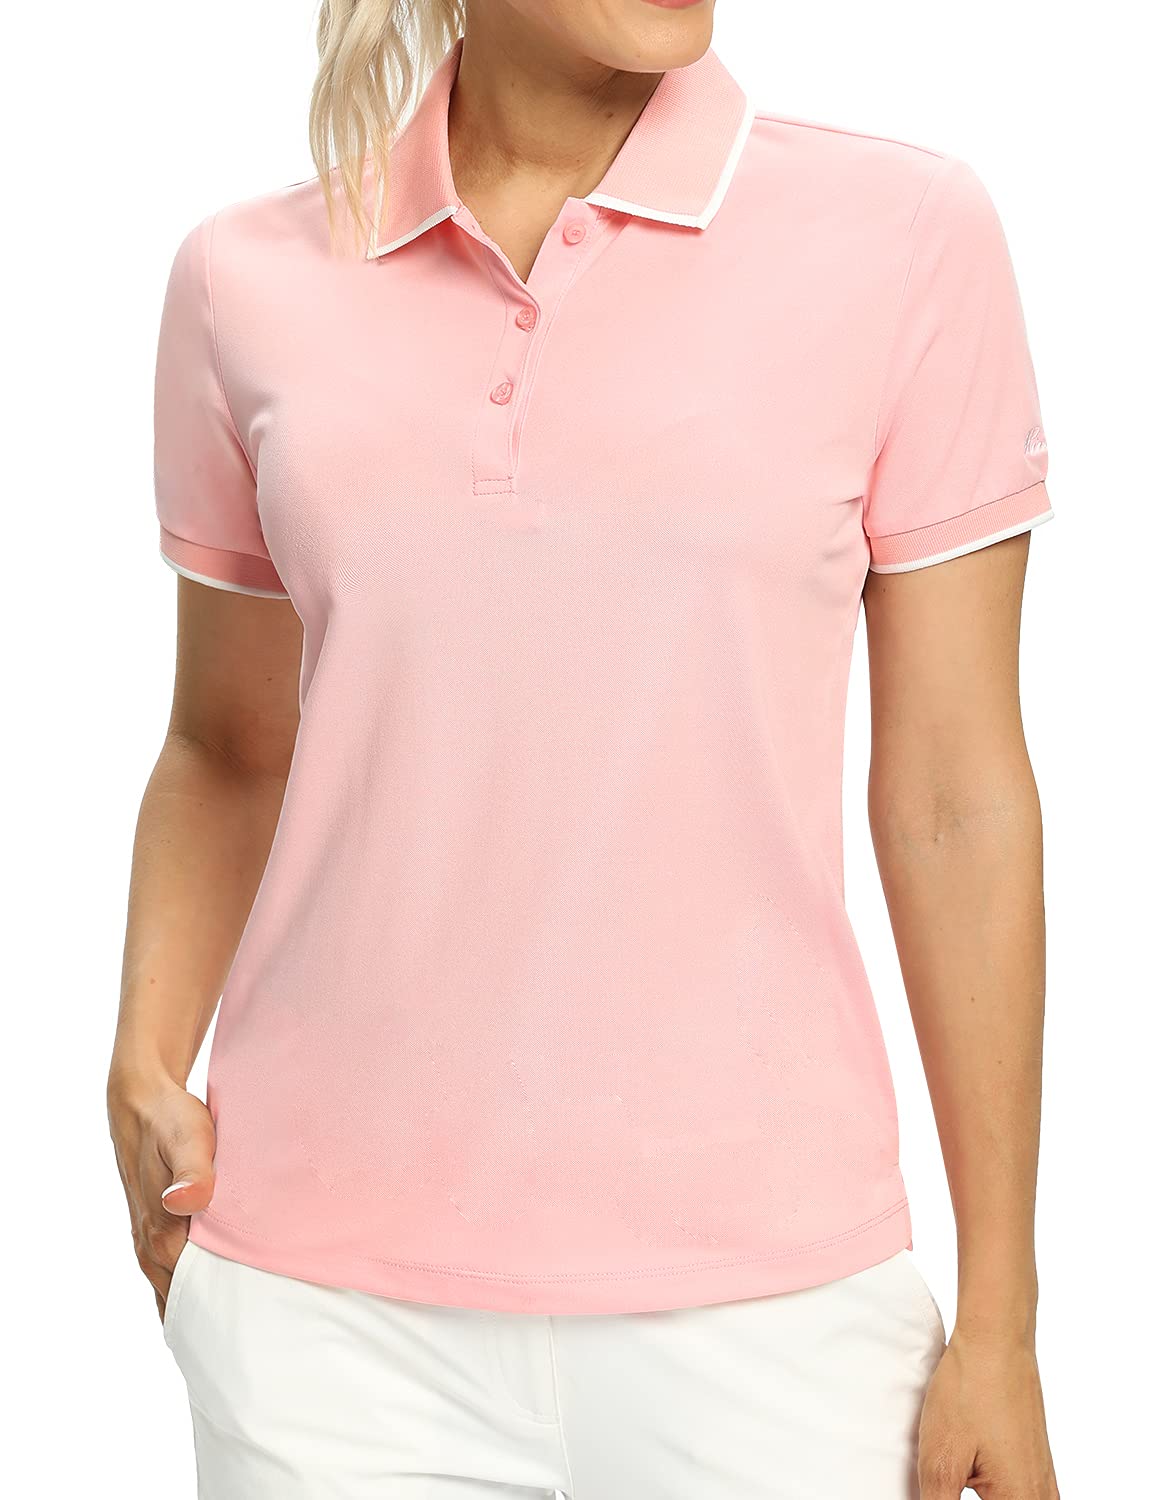 Hiverlay Women Edge Quick-Dry Golf 50+ Edge Color Women Pink-contrast Daily Lightweight UPF Contrast Tennis Tops Color Shirts for X-Large Shirts Polo Shirts Collared Work